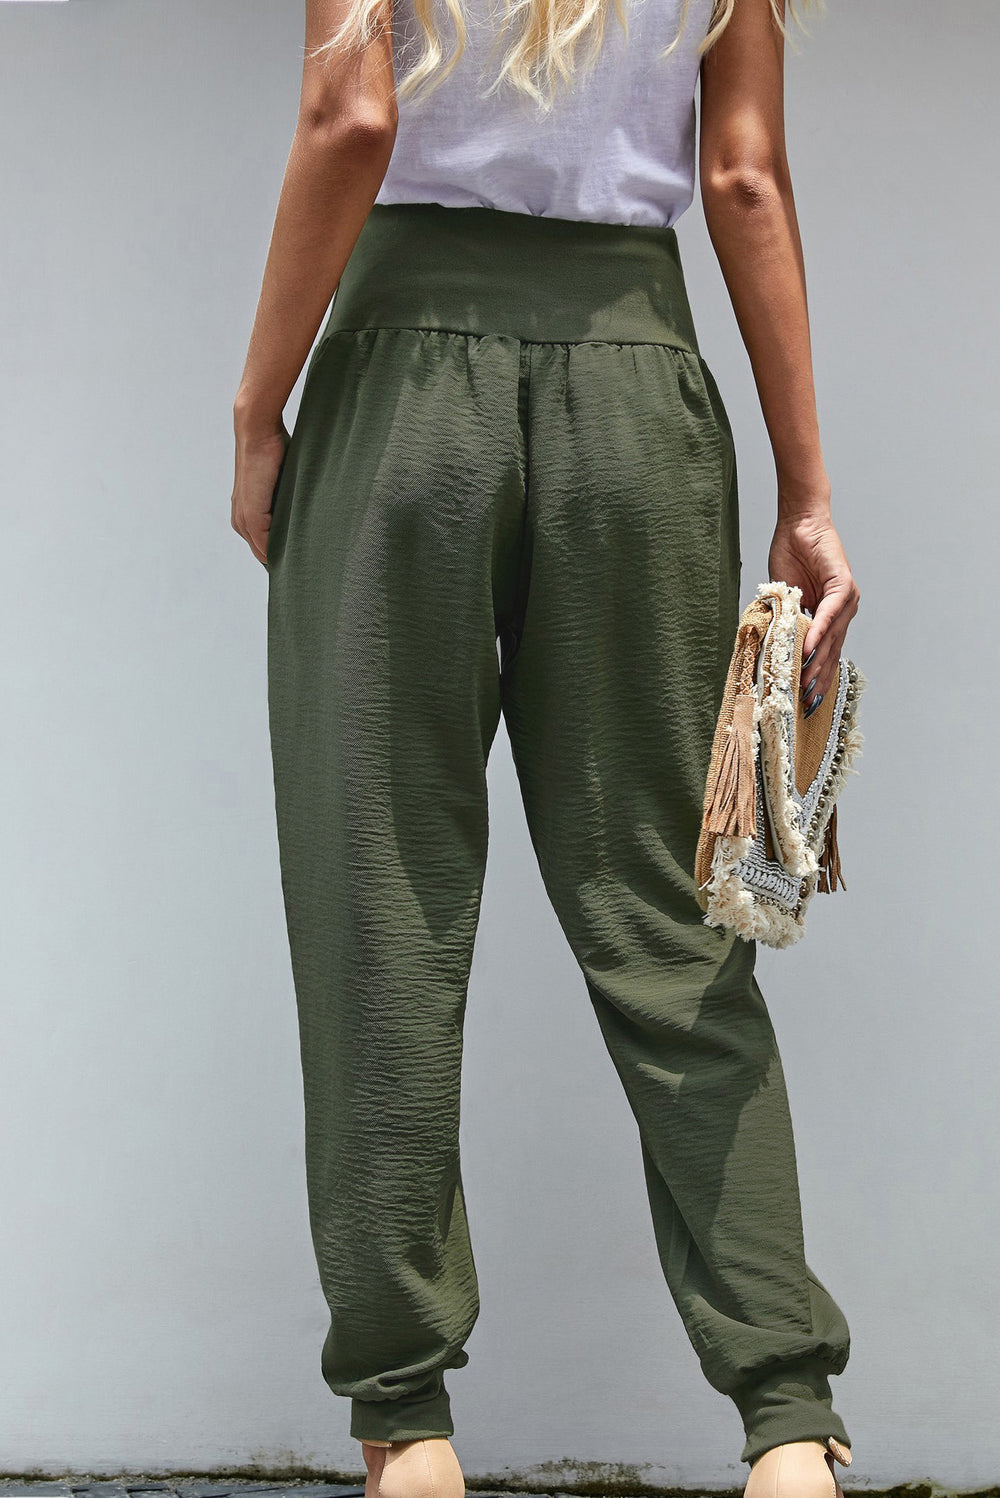 Green Pocketed Stretchy High Waistband Cotton Joggers